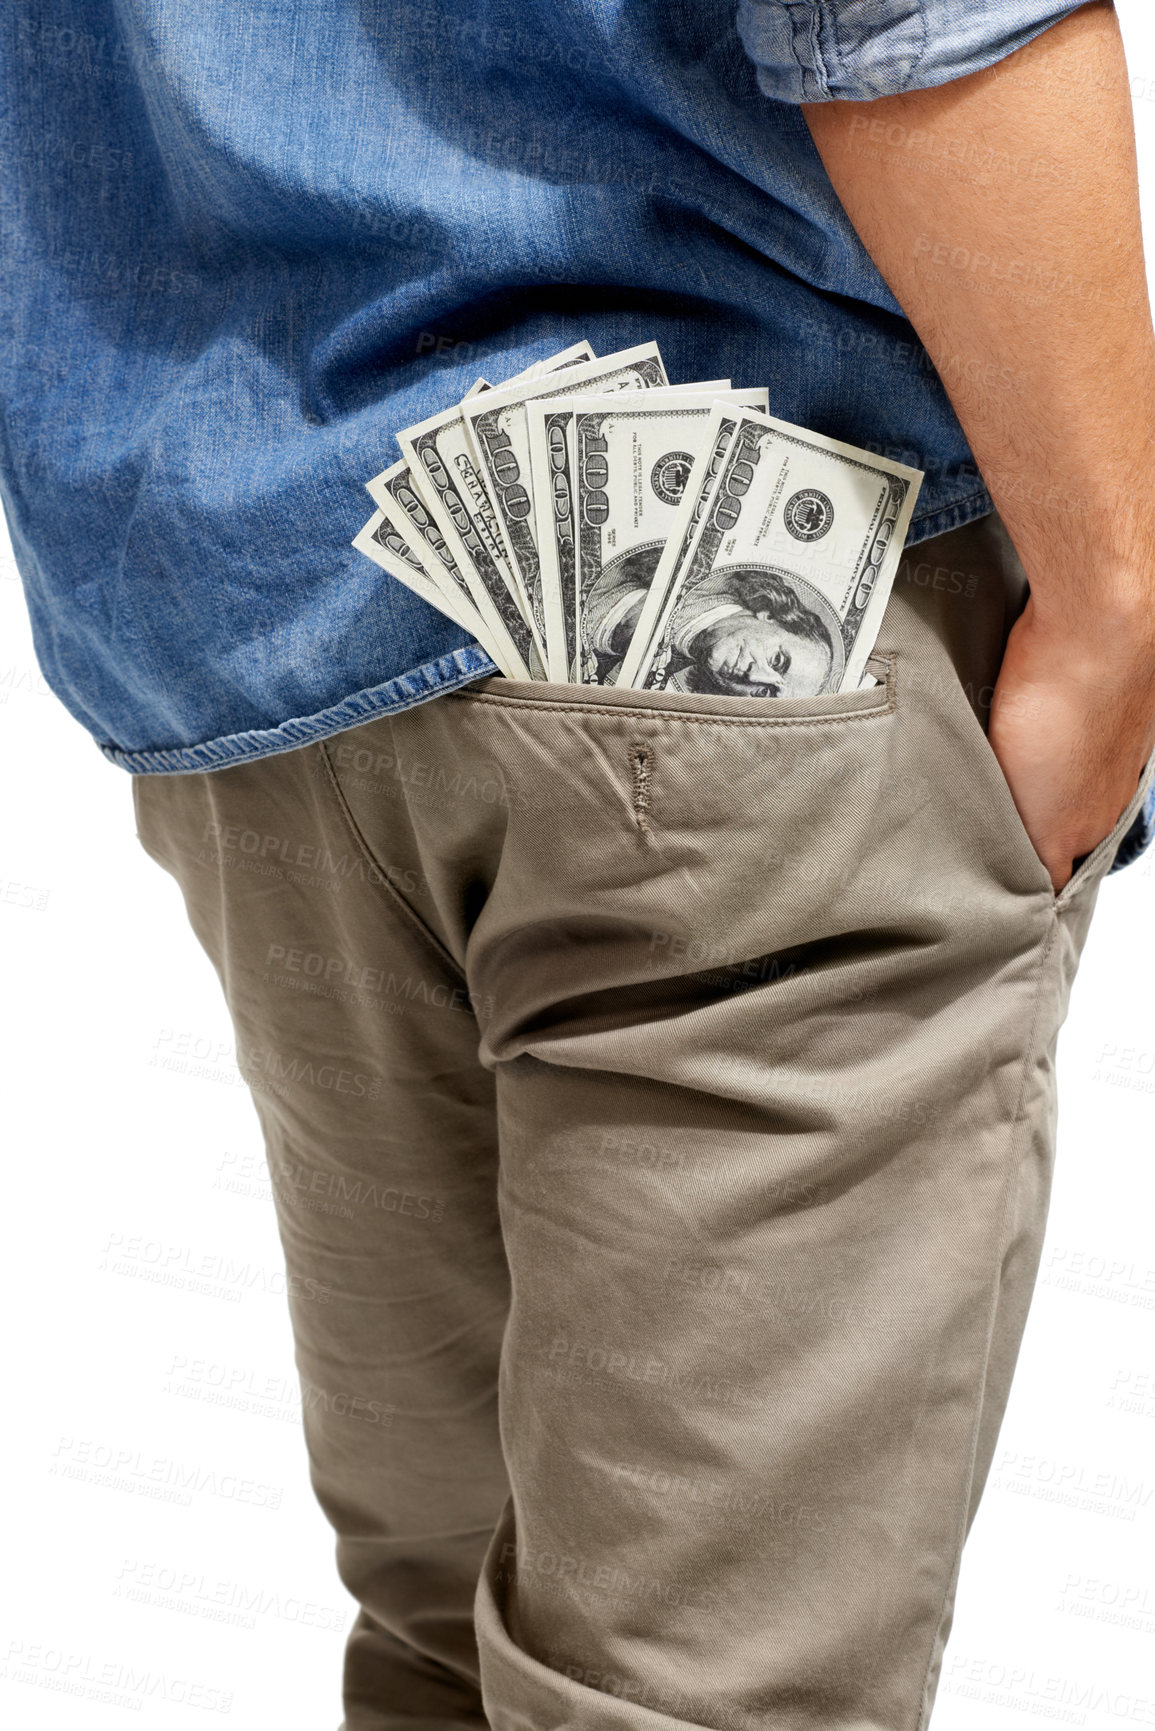 Buy stock photo Cropped image of a wad of cash sticking out of a man's pocket